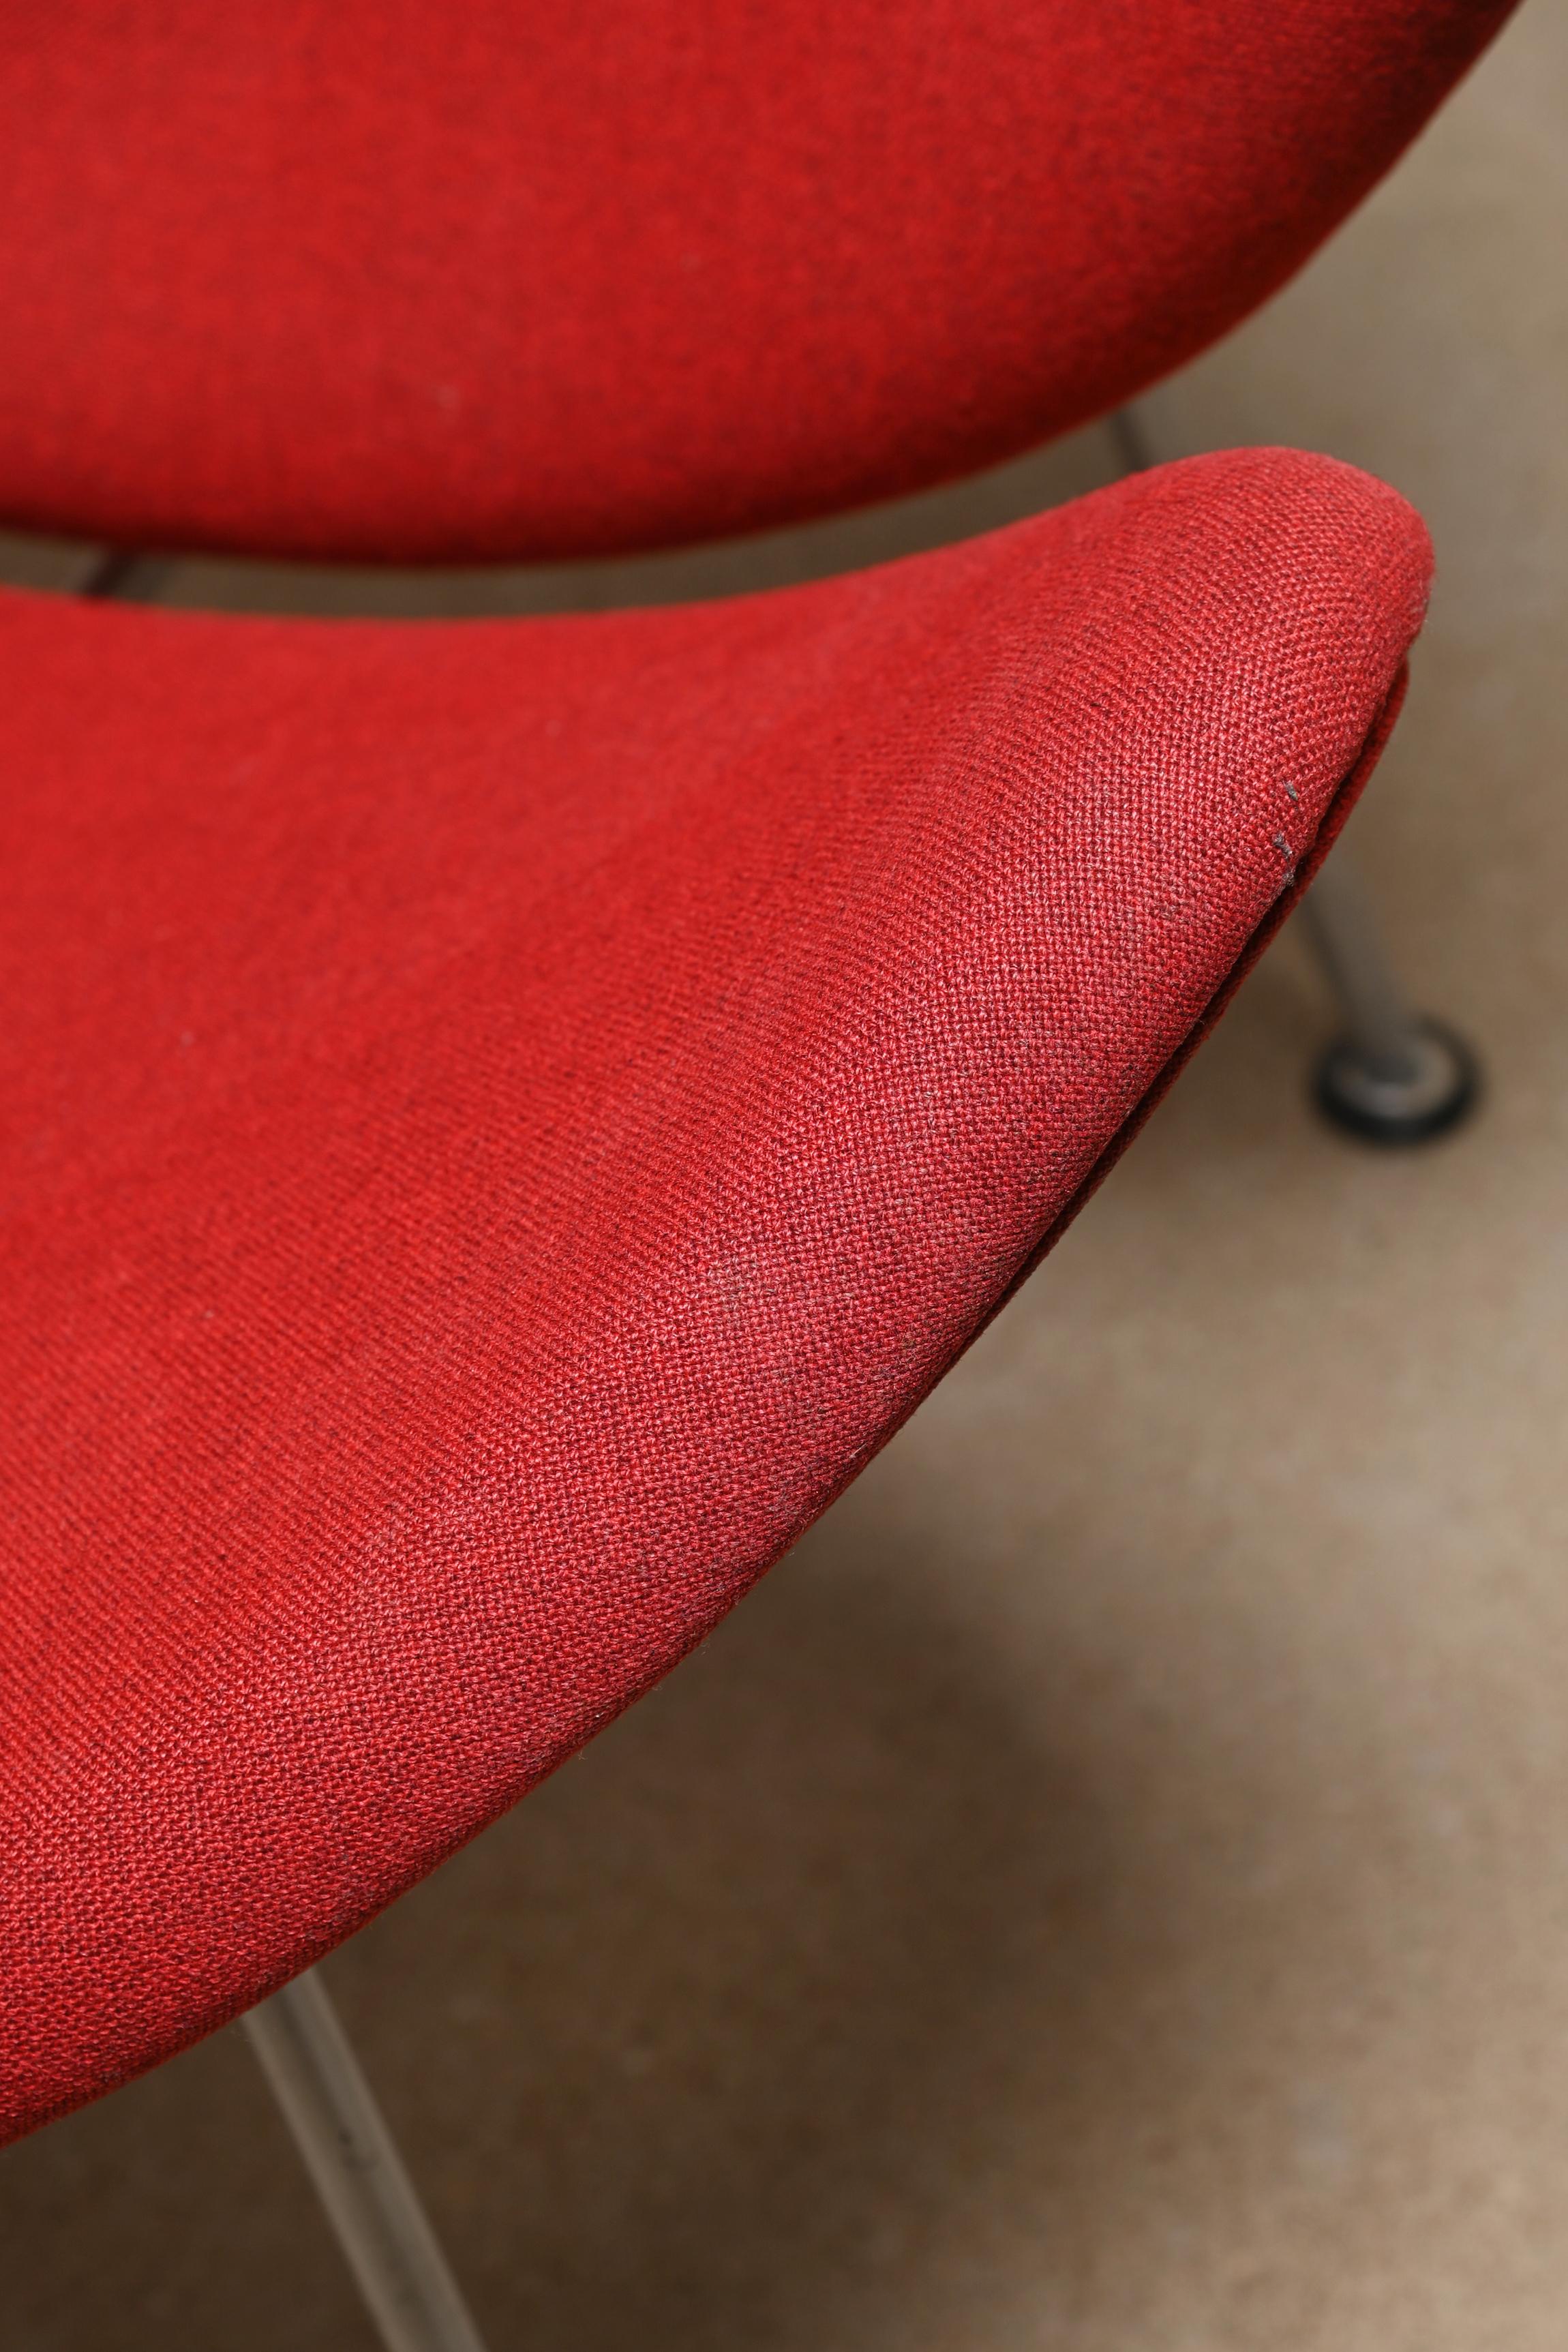 Early Pierre Paulin 'Orange Slice' Chair in Red Fabric by Artifort, Netherlands For Sale 2